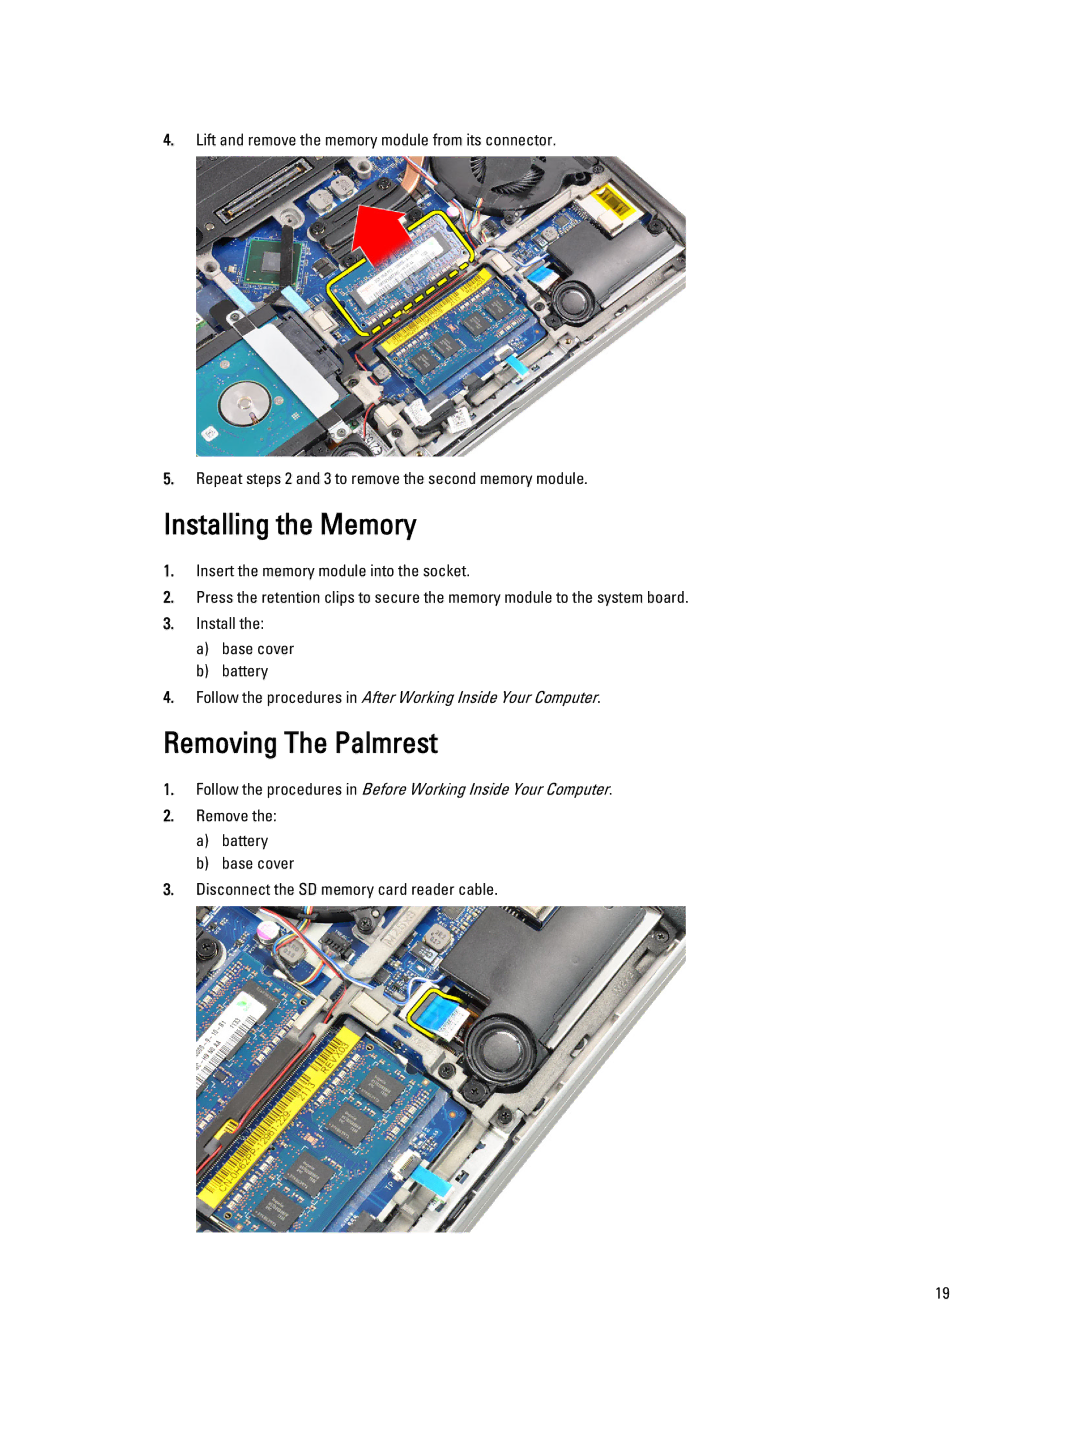 Dell E6230 owner manual Installing the Memory, Removing The Palmrest 